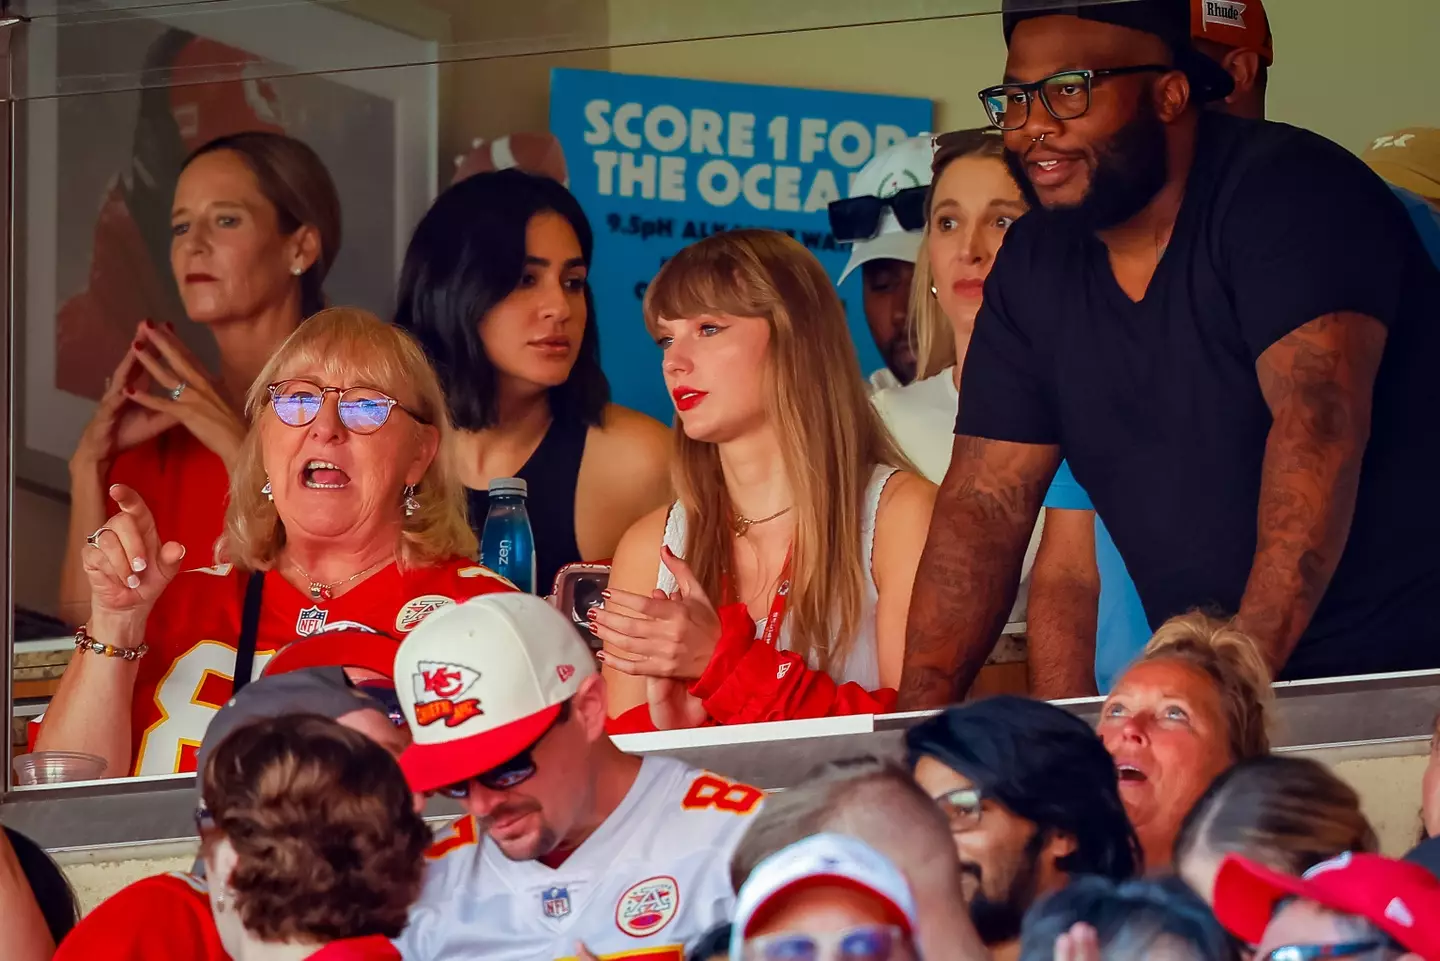 Taylor Swift showed her support for Travis at an NFL game.